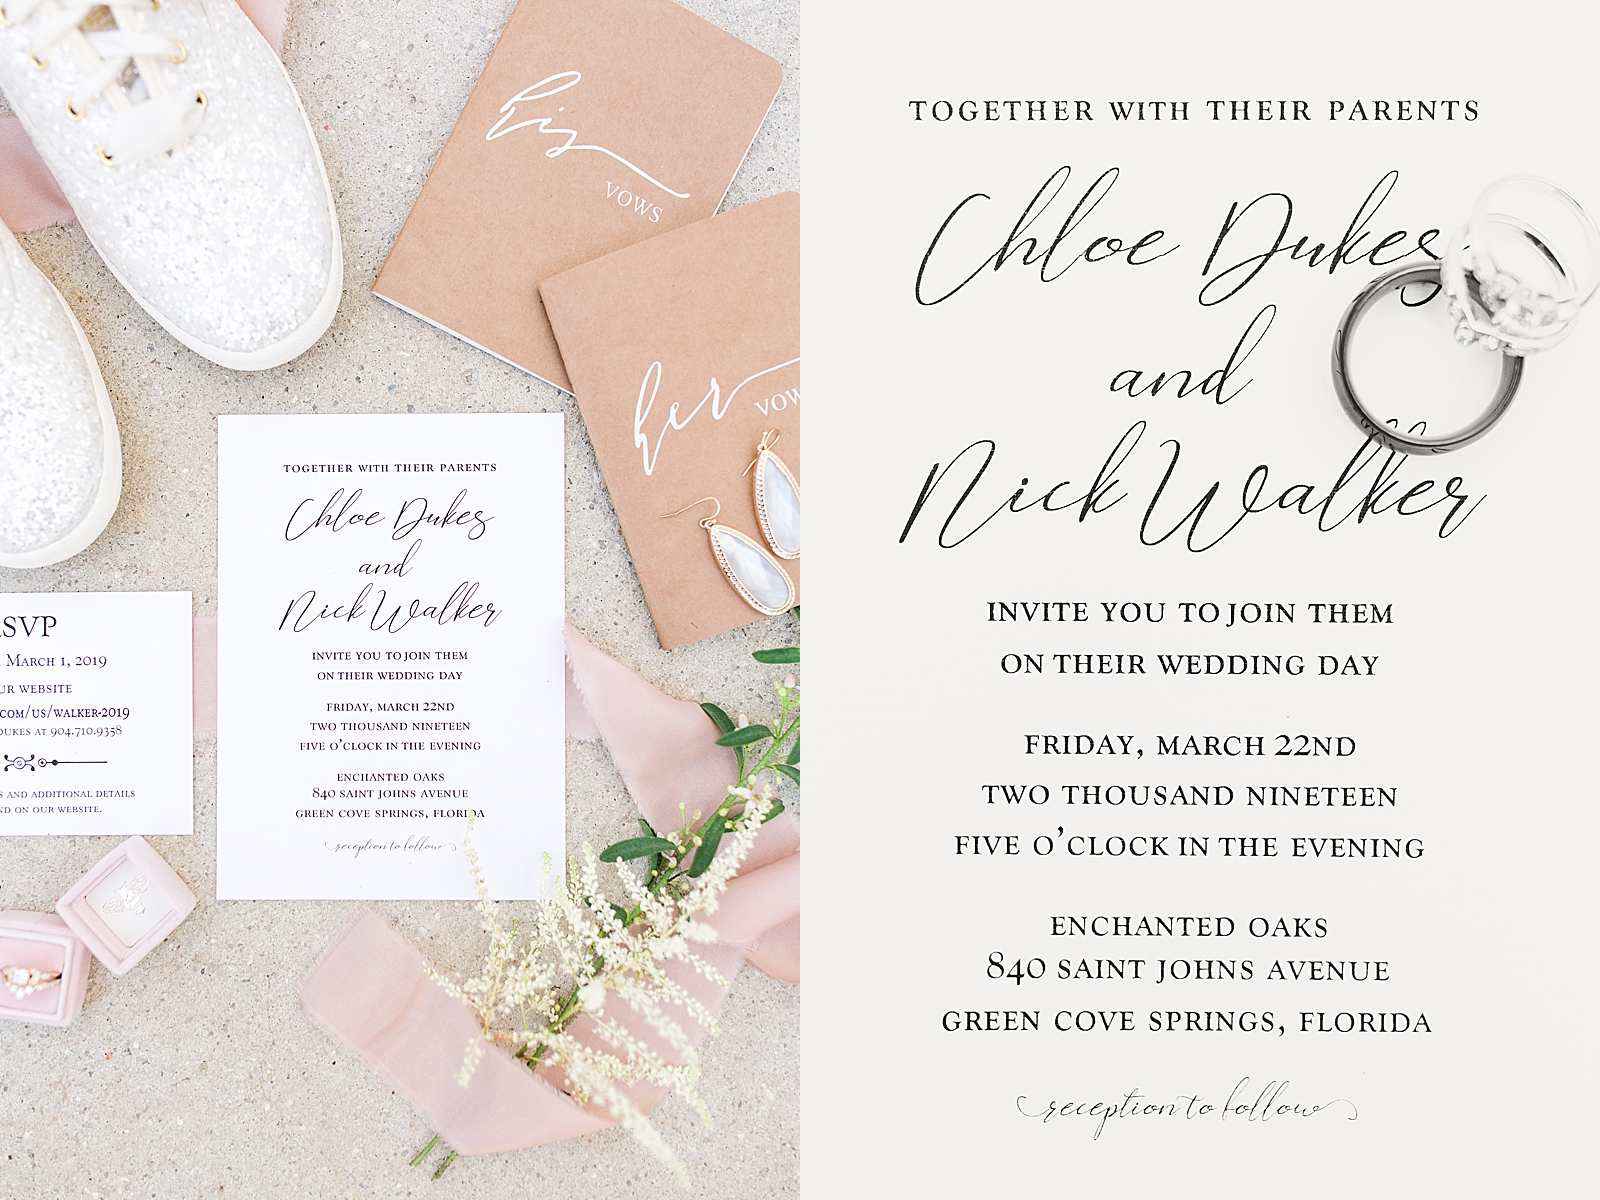 Enchanted Oaks Jacksonville Wedding Invitation Suite vow books bridal shoes and black and white of invitation with rings Photos